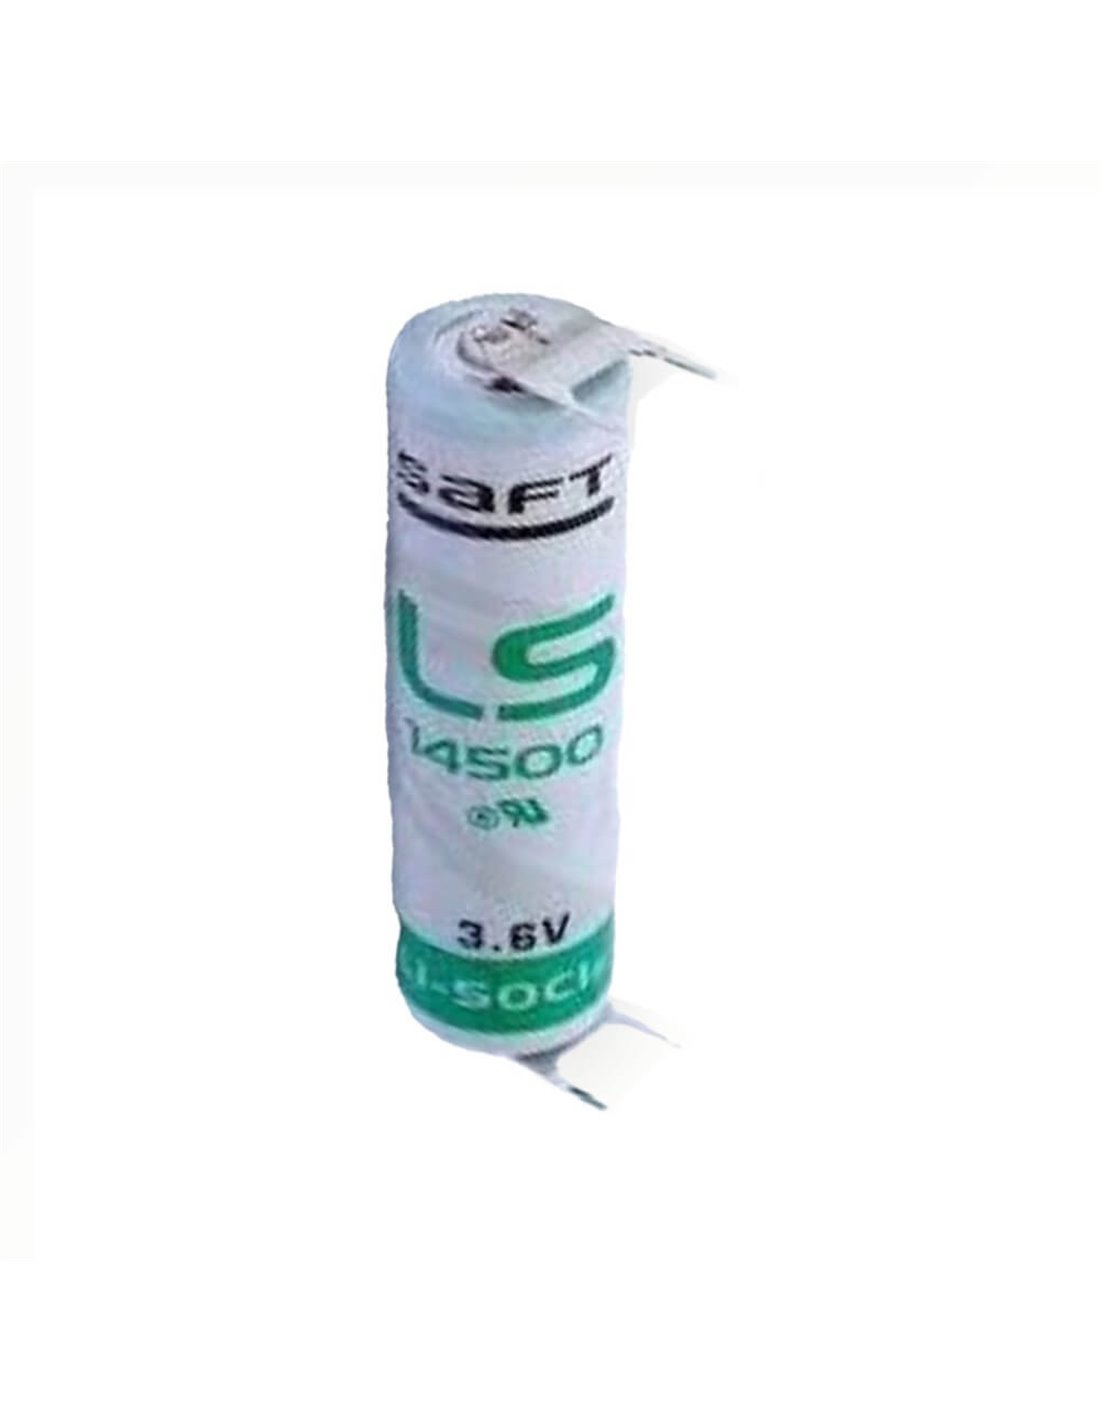 2 Saft LS 14500 LS14500 AA 3.6V Lithium Battery *Made In France